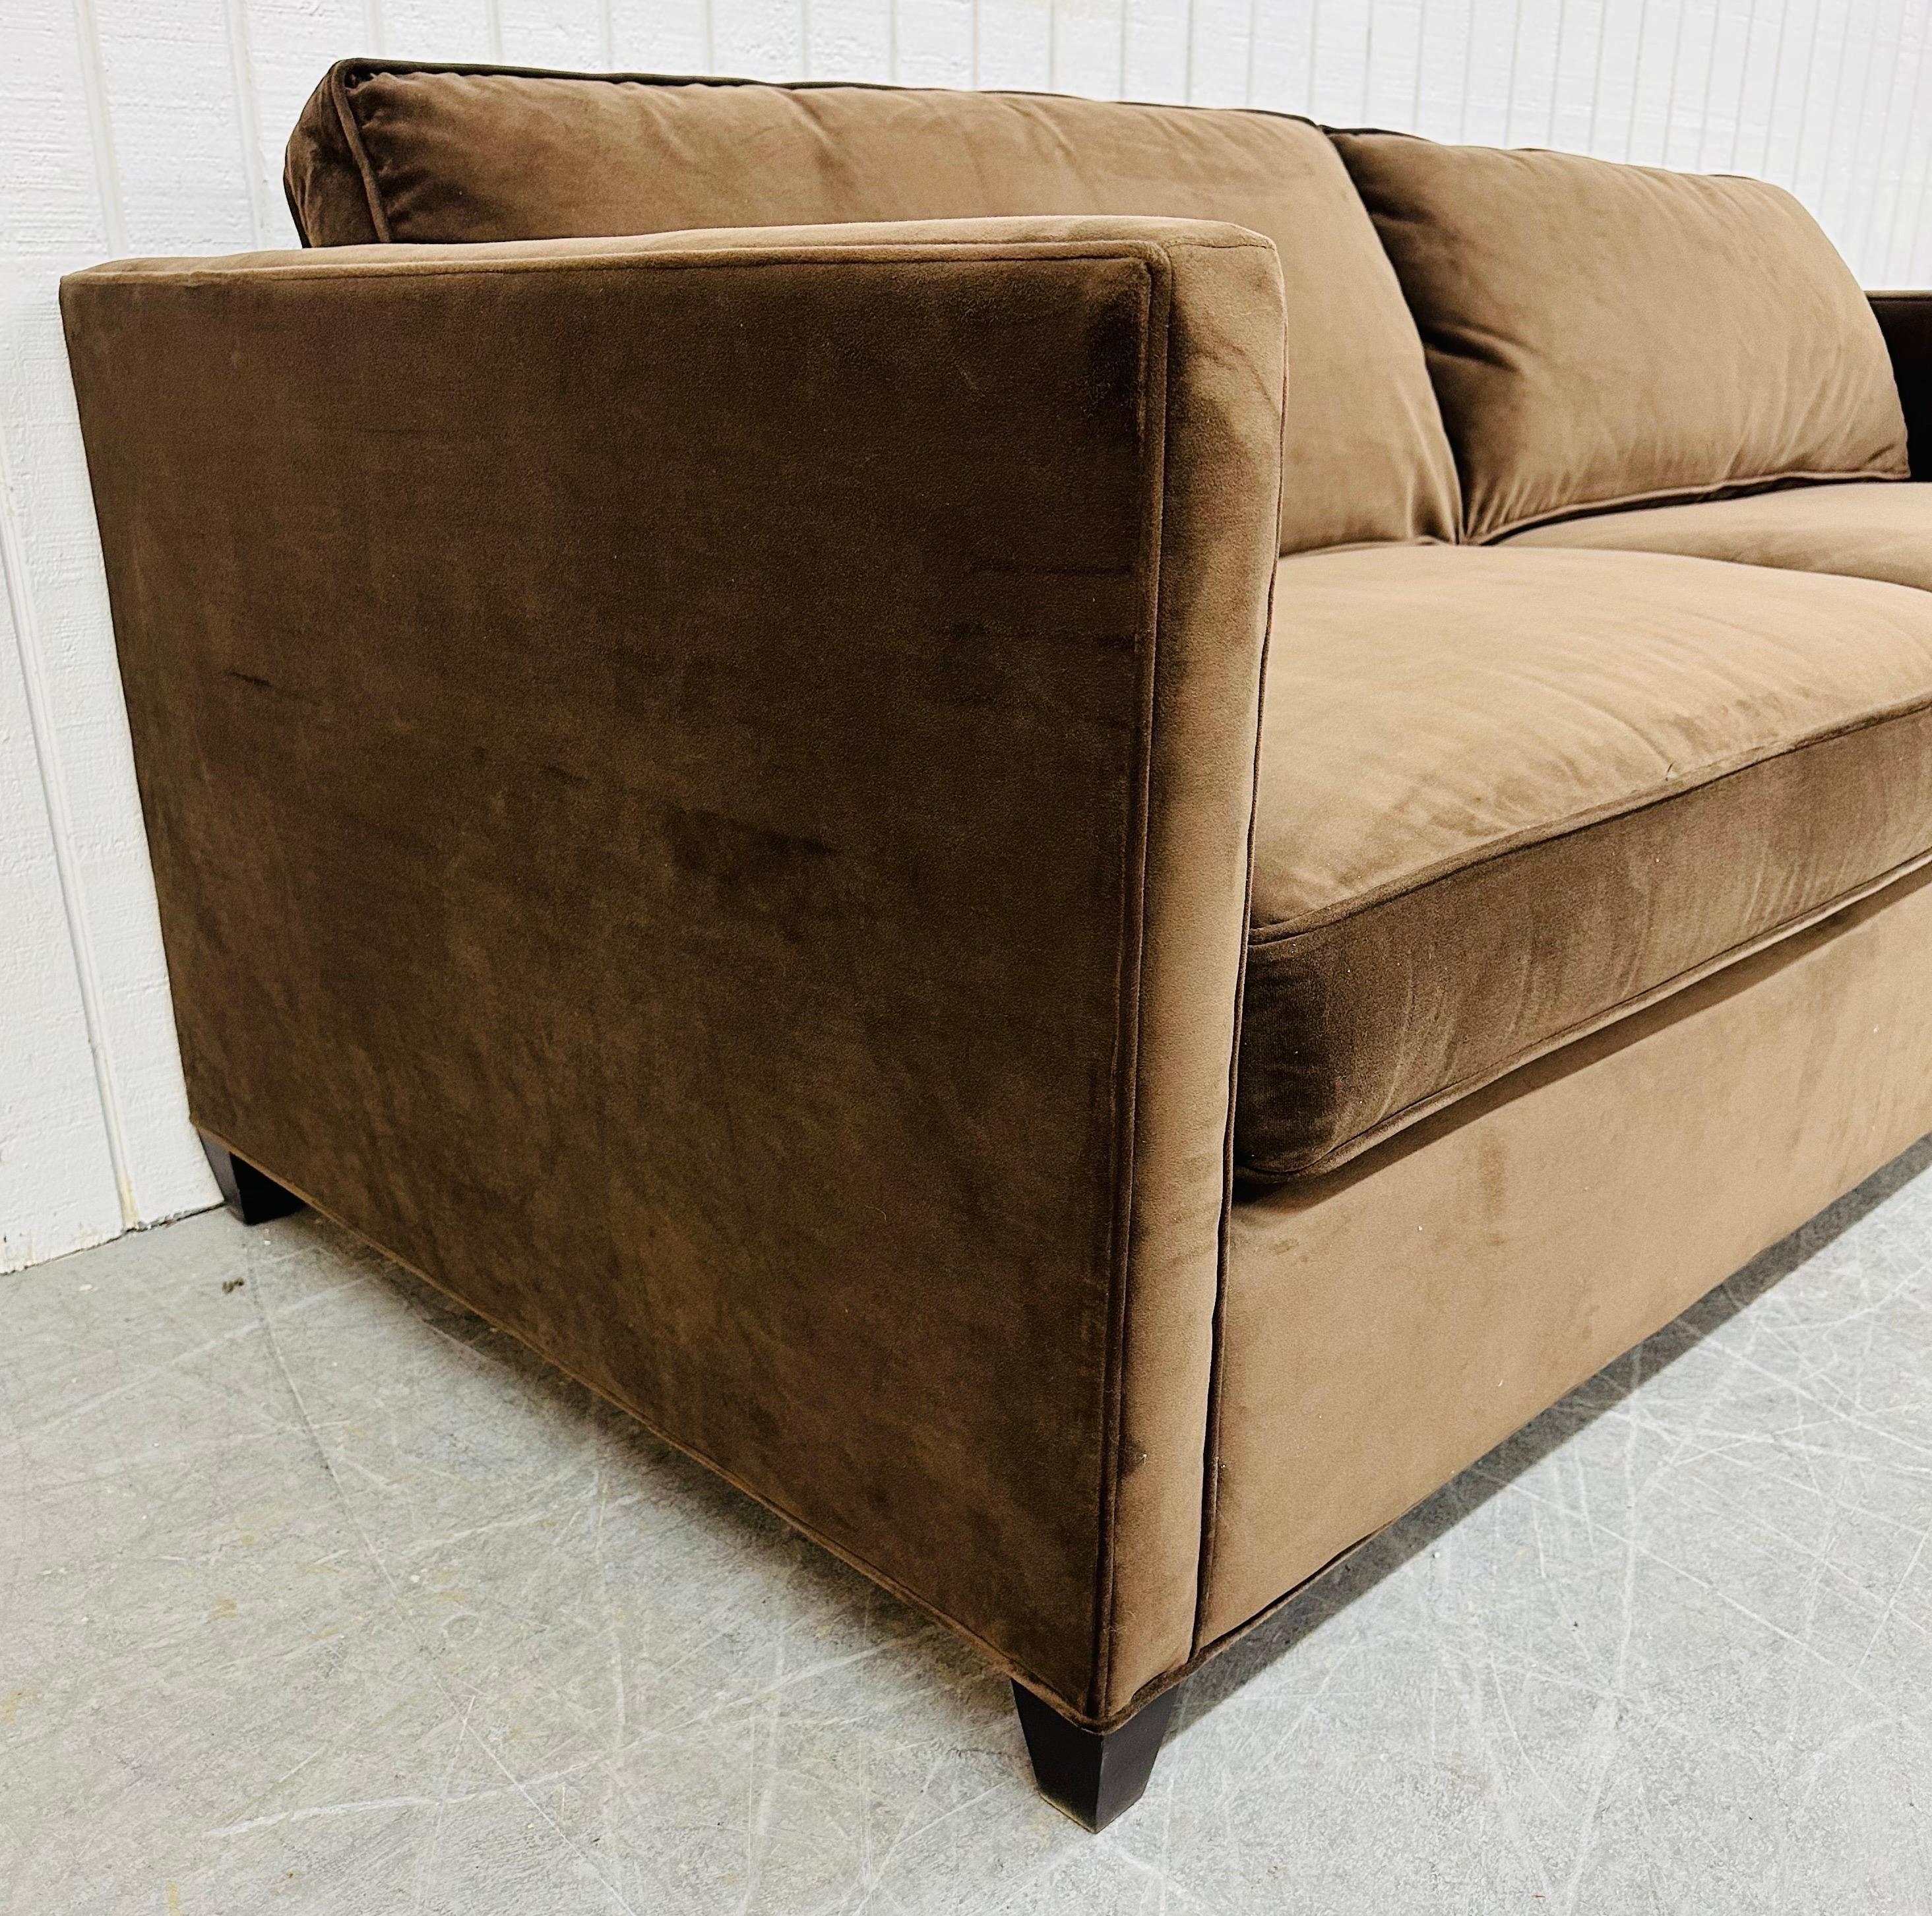 This listing is for a Modern Crate & Barrel Chocolate Sofa. Featuring a straight line design, two large cushions for seating, removal back pillows, black modern legs, and a beautiful chocolate color. This is an exceptional combination of quality and